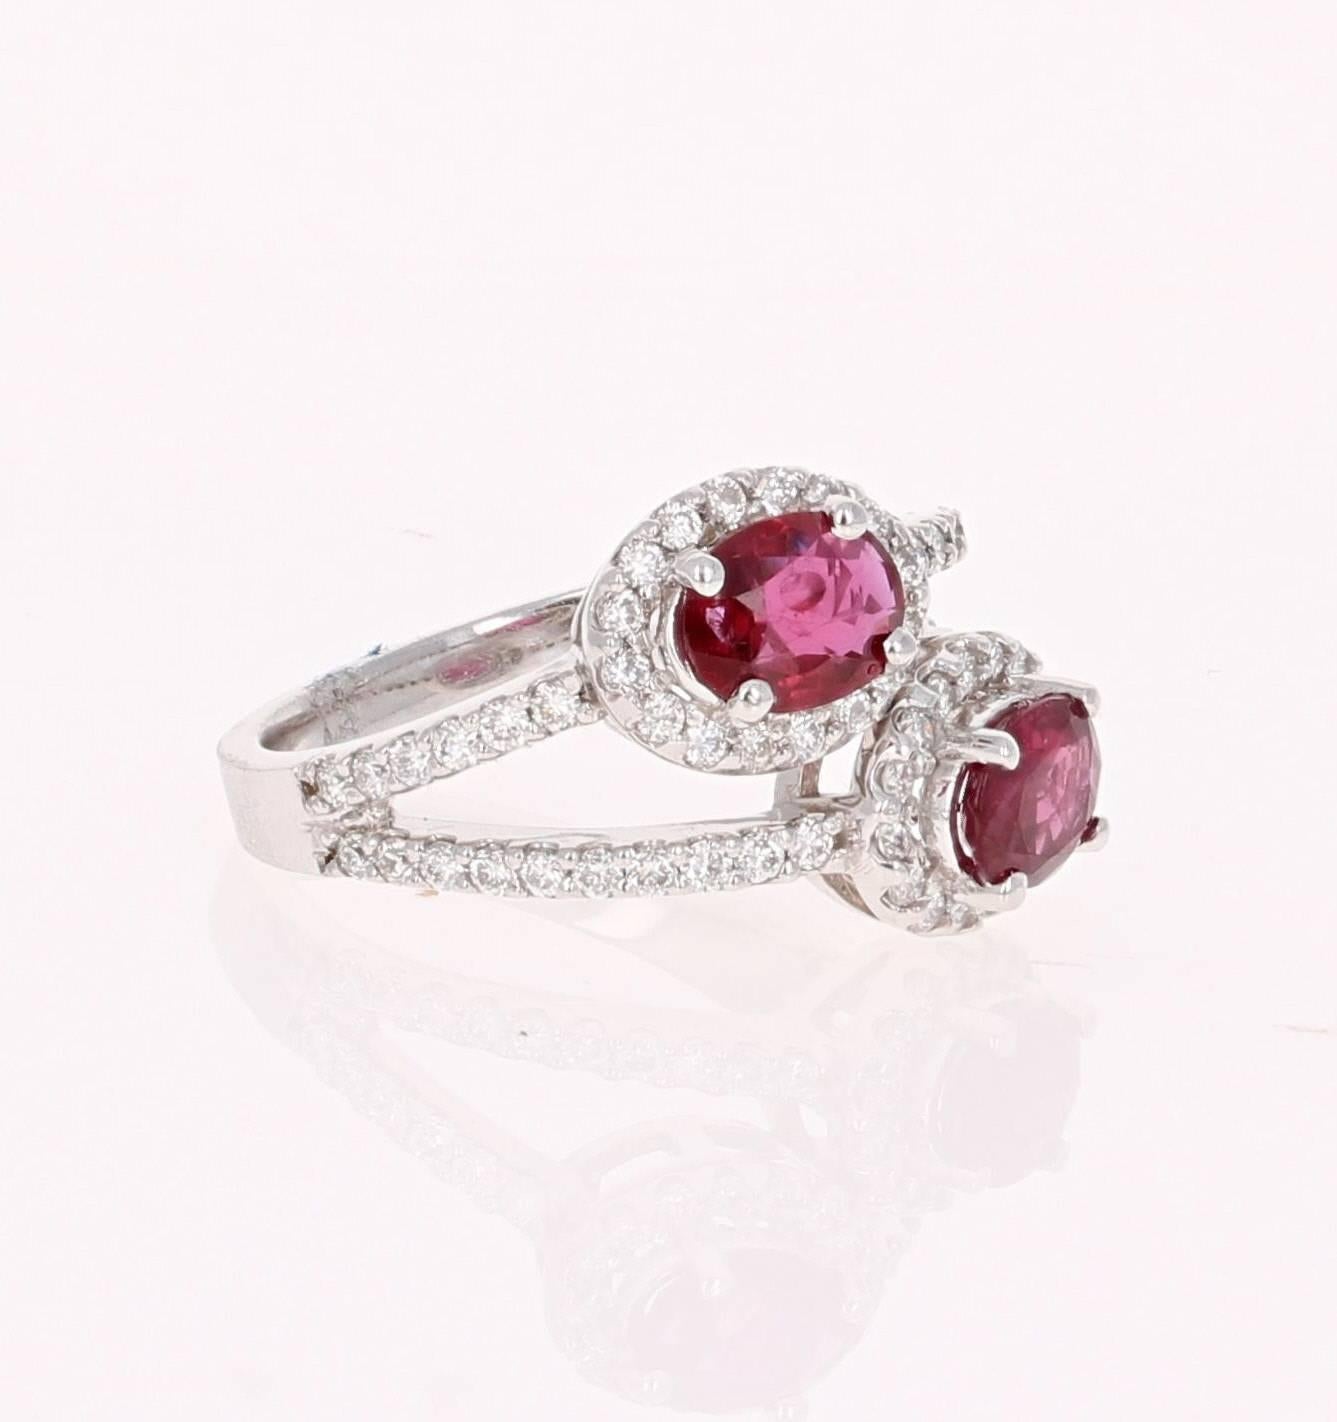 This is a gorgeous GIA Certified 2-stone Ruby and Diamond Ring....Inspired by the 